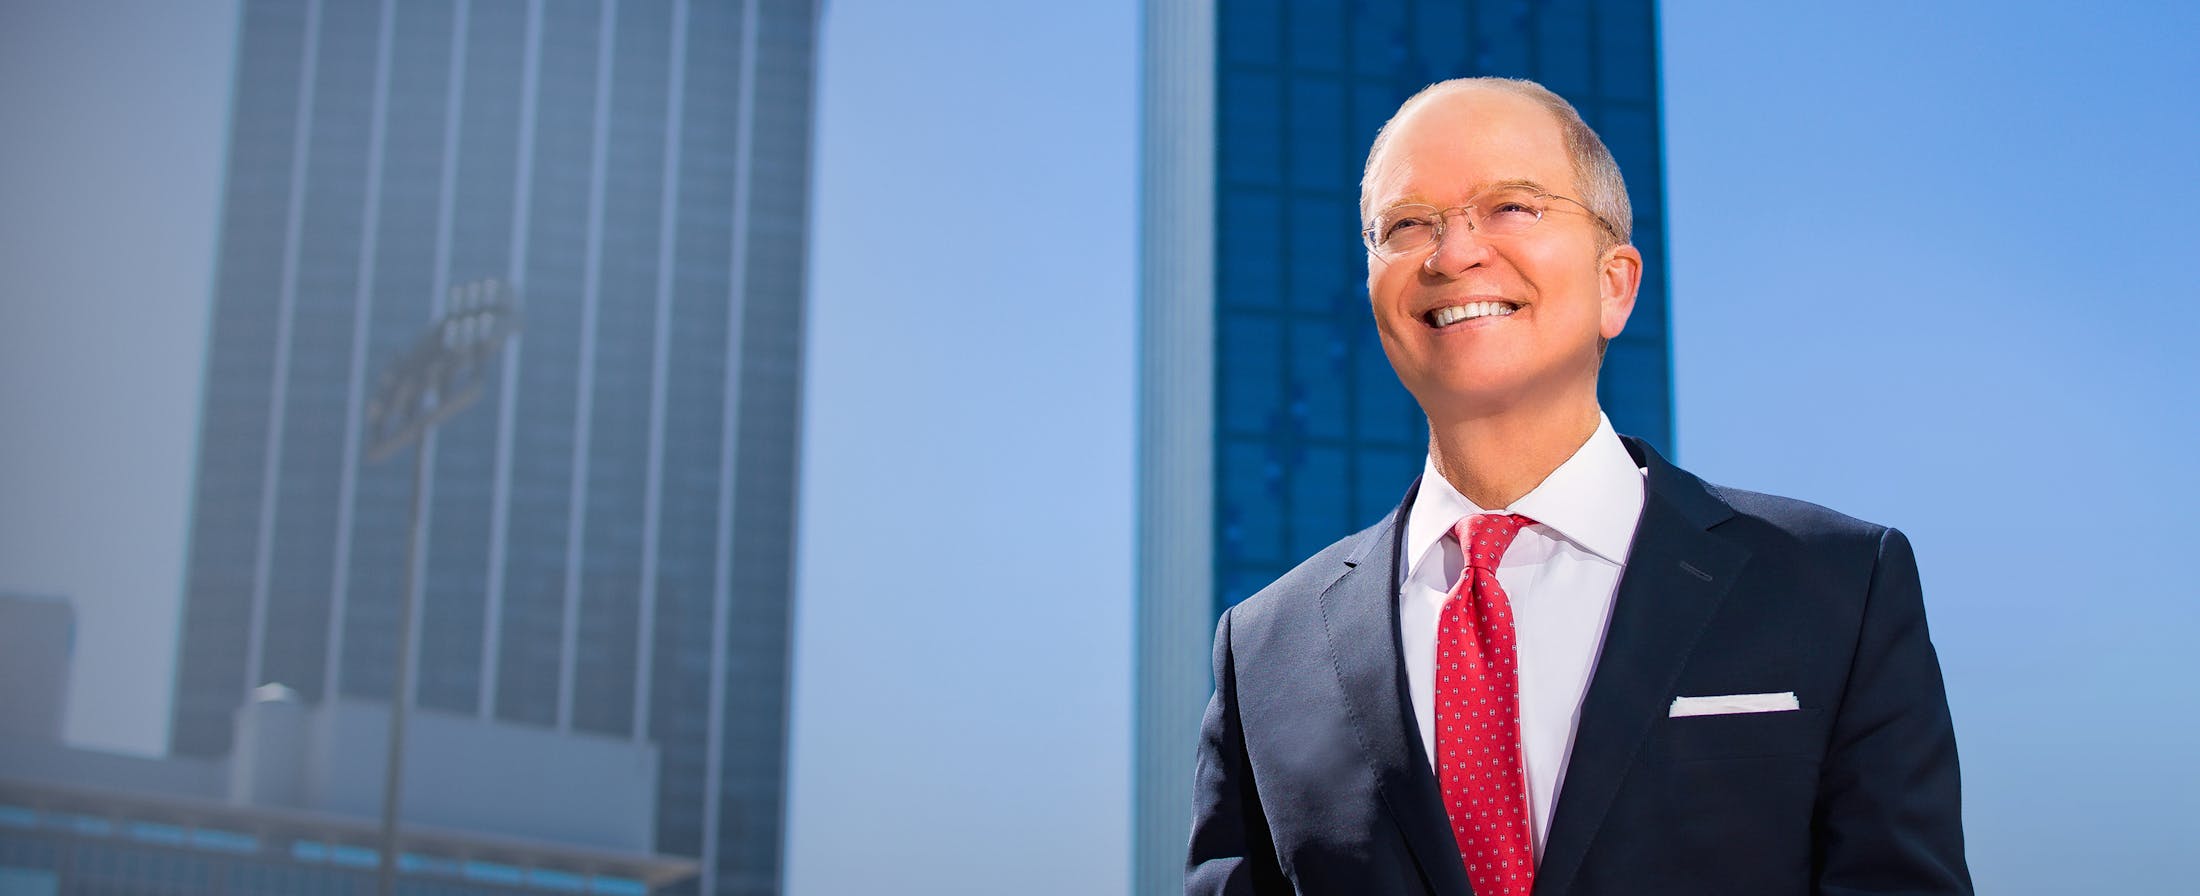 Dr. Pruitt Smiling with Tall Buildings in the Background